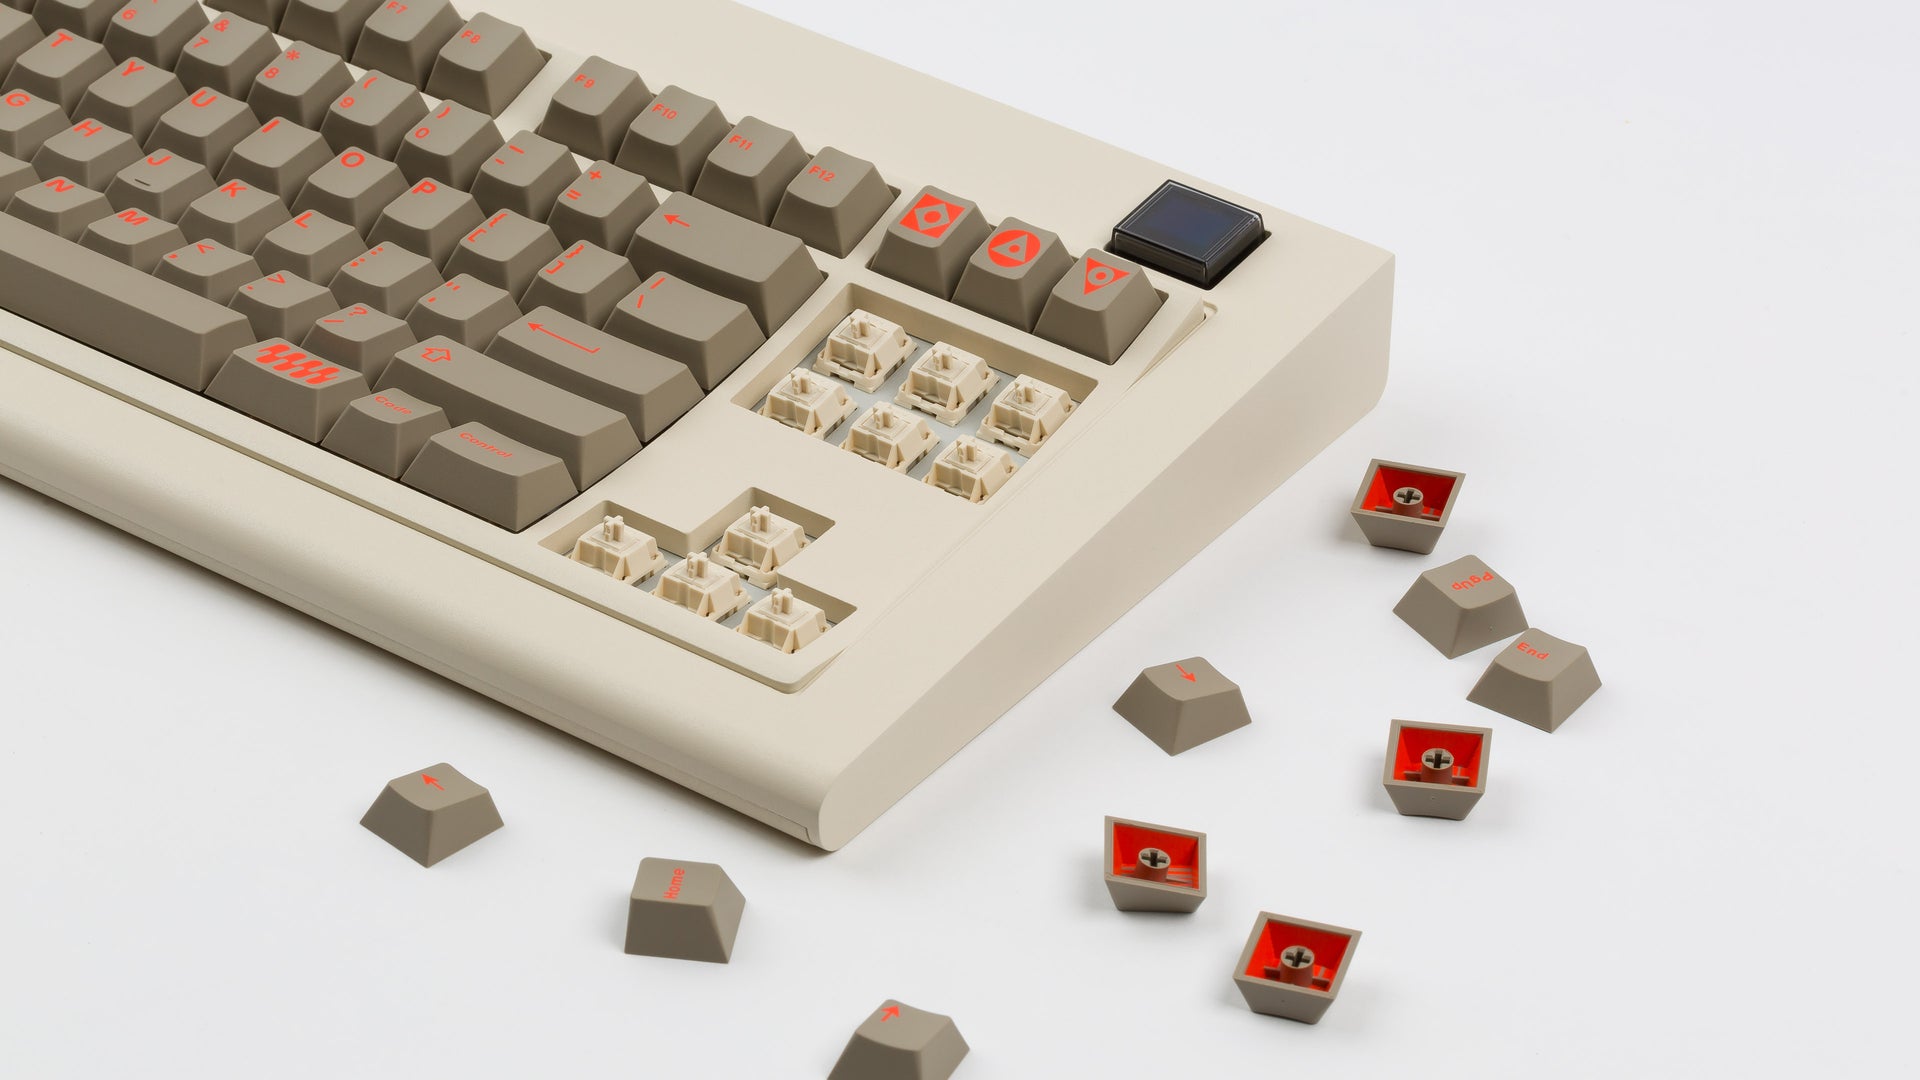 Vintage Beige Model OLED zoomed in on right featuring Key Kobo Signet with cream switches